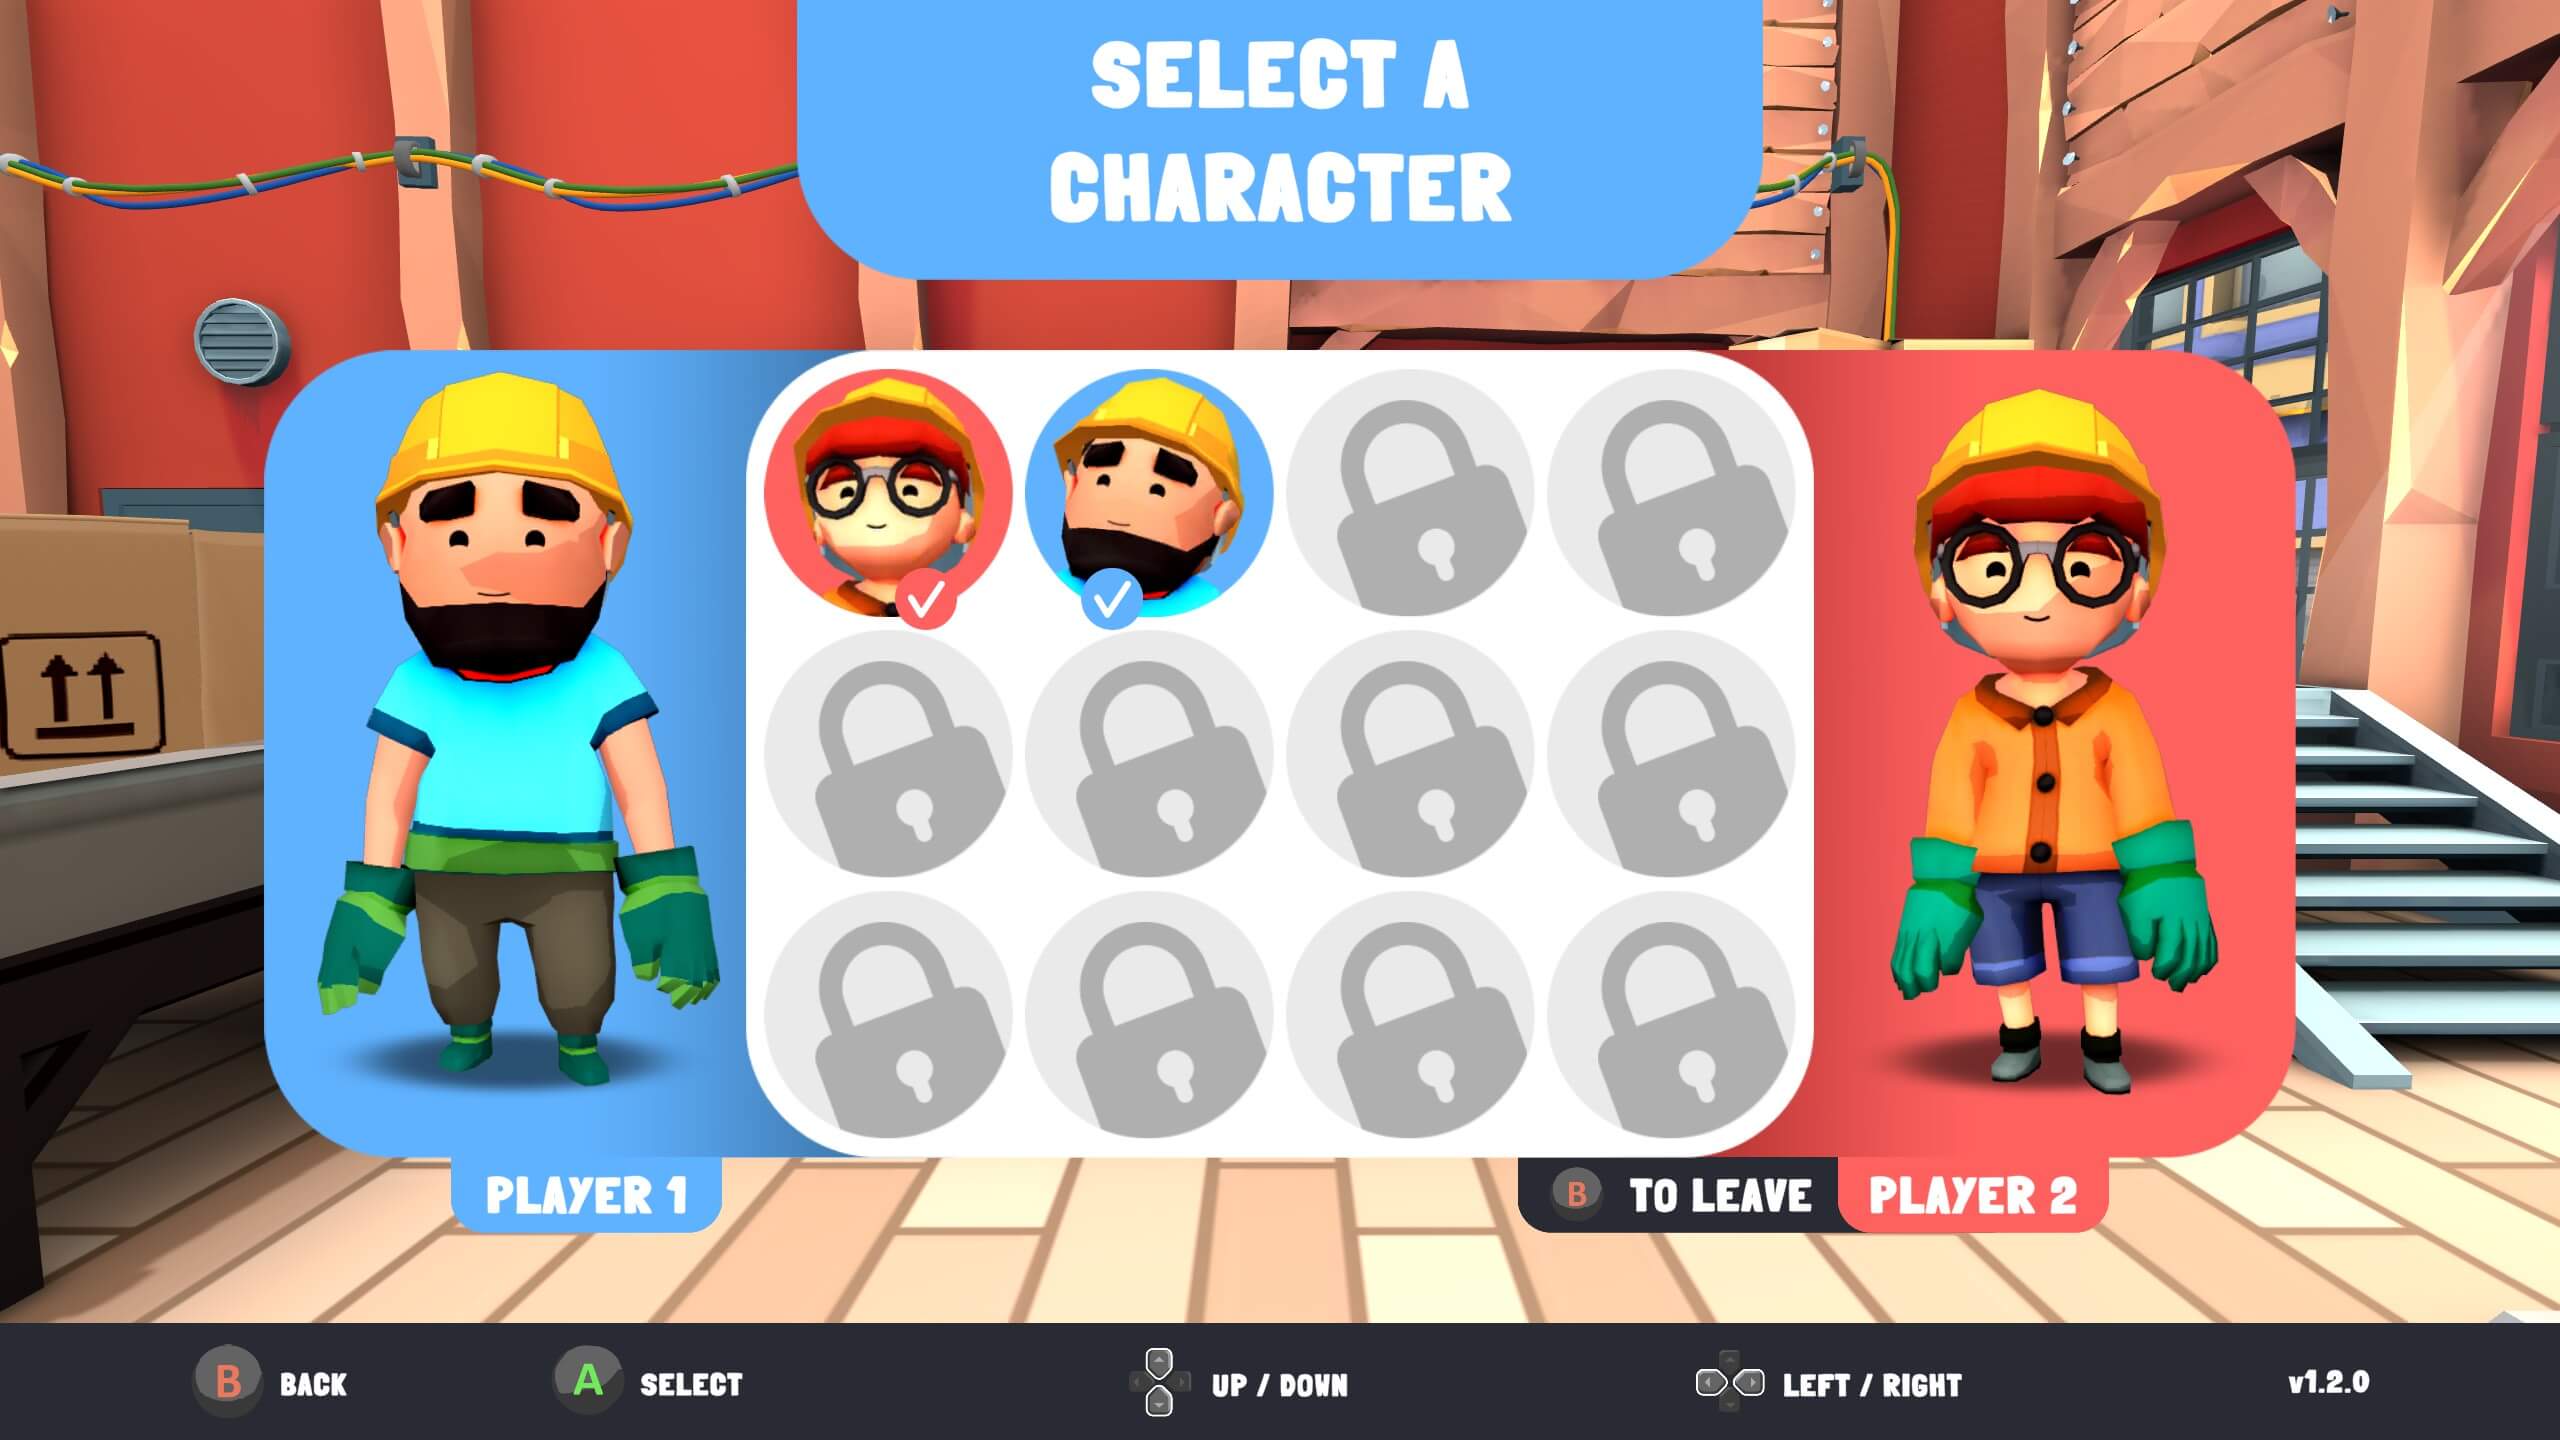 Playing in cooperative, two character models that you start the game with are on either side of the screen. With select a character at the top. In the background is a cartoon style factory